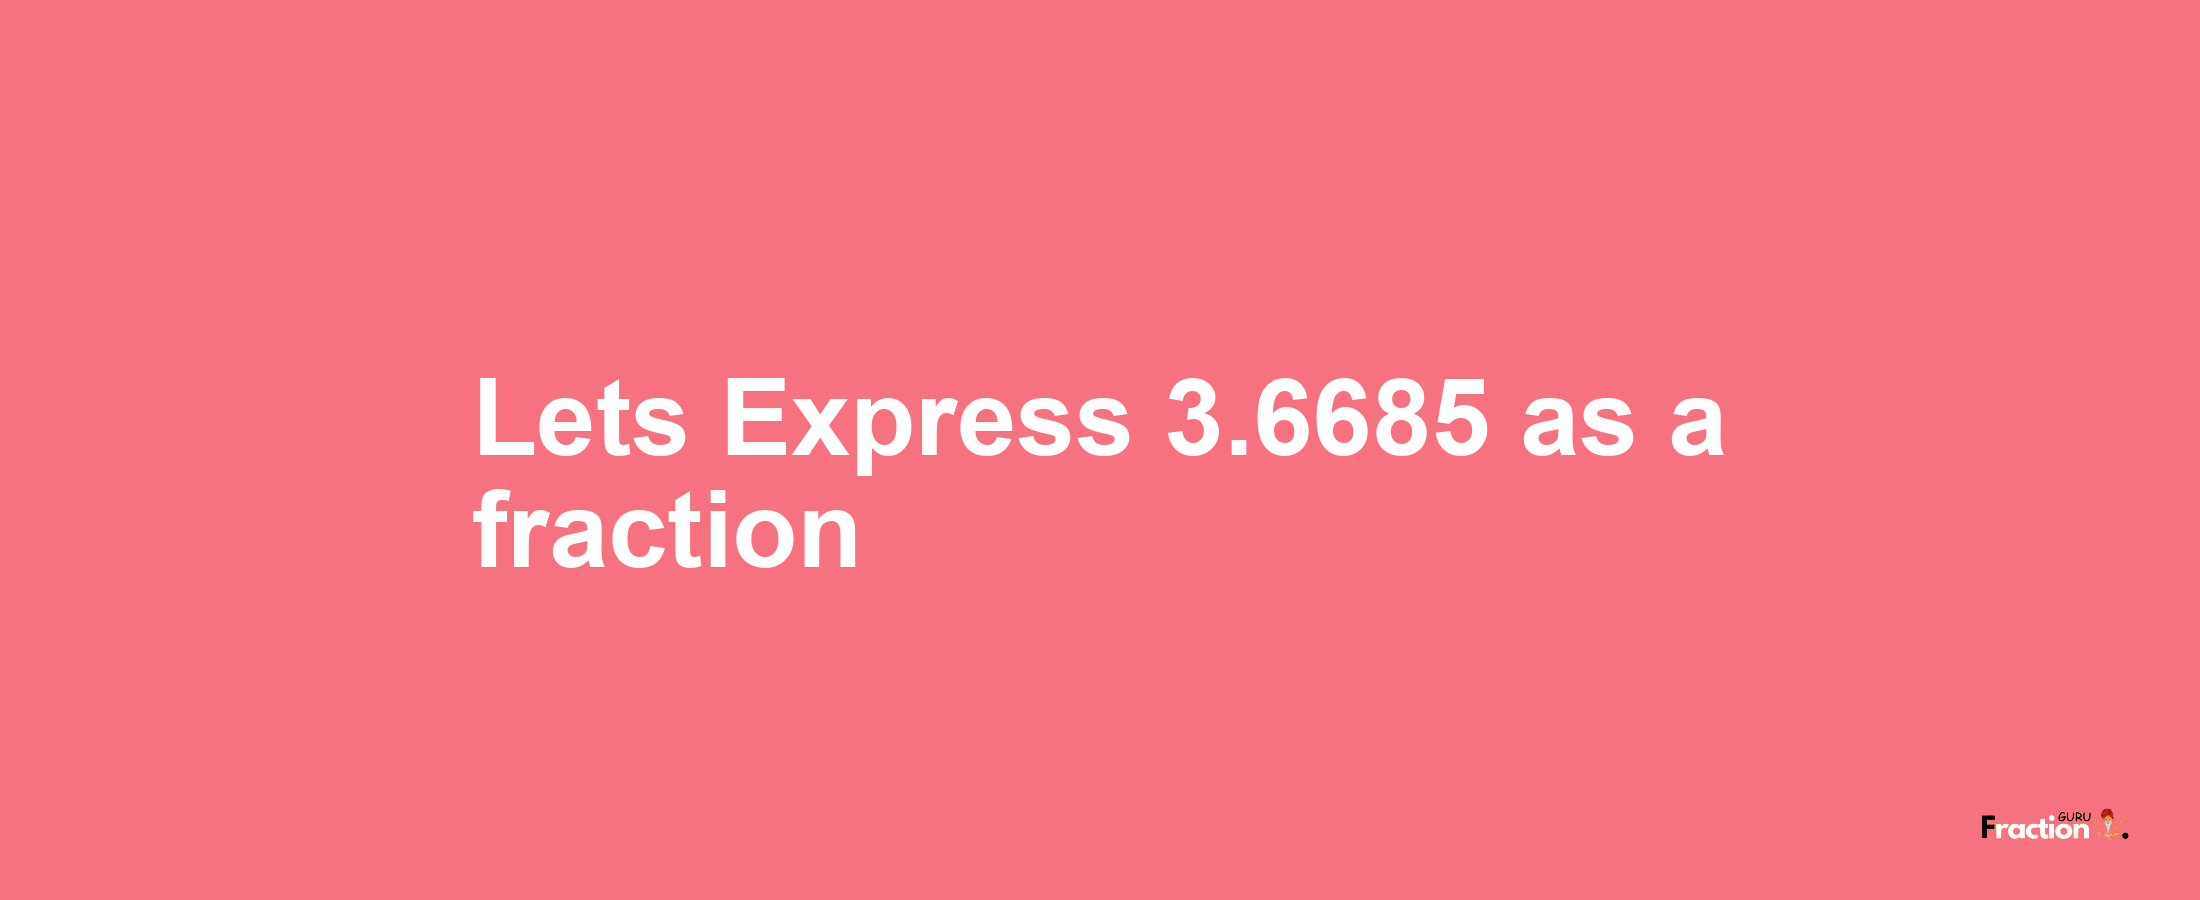 Lets Express 3.6685 as afraction